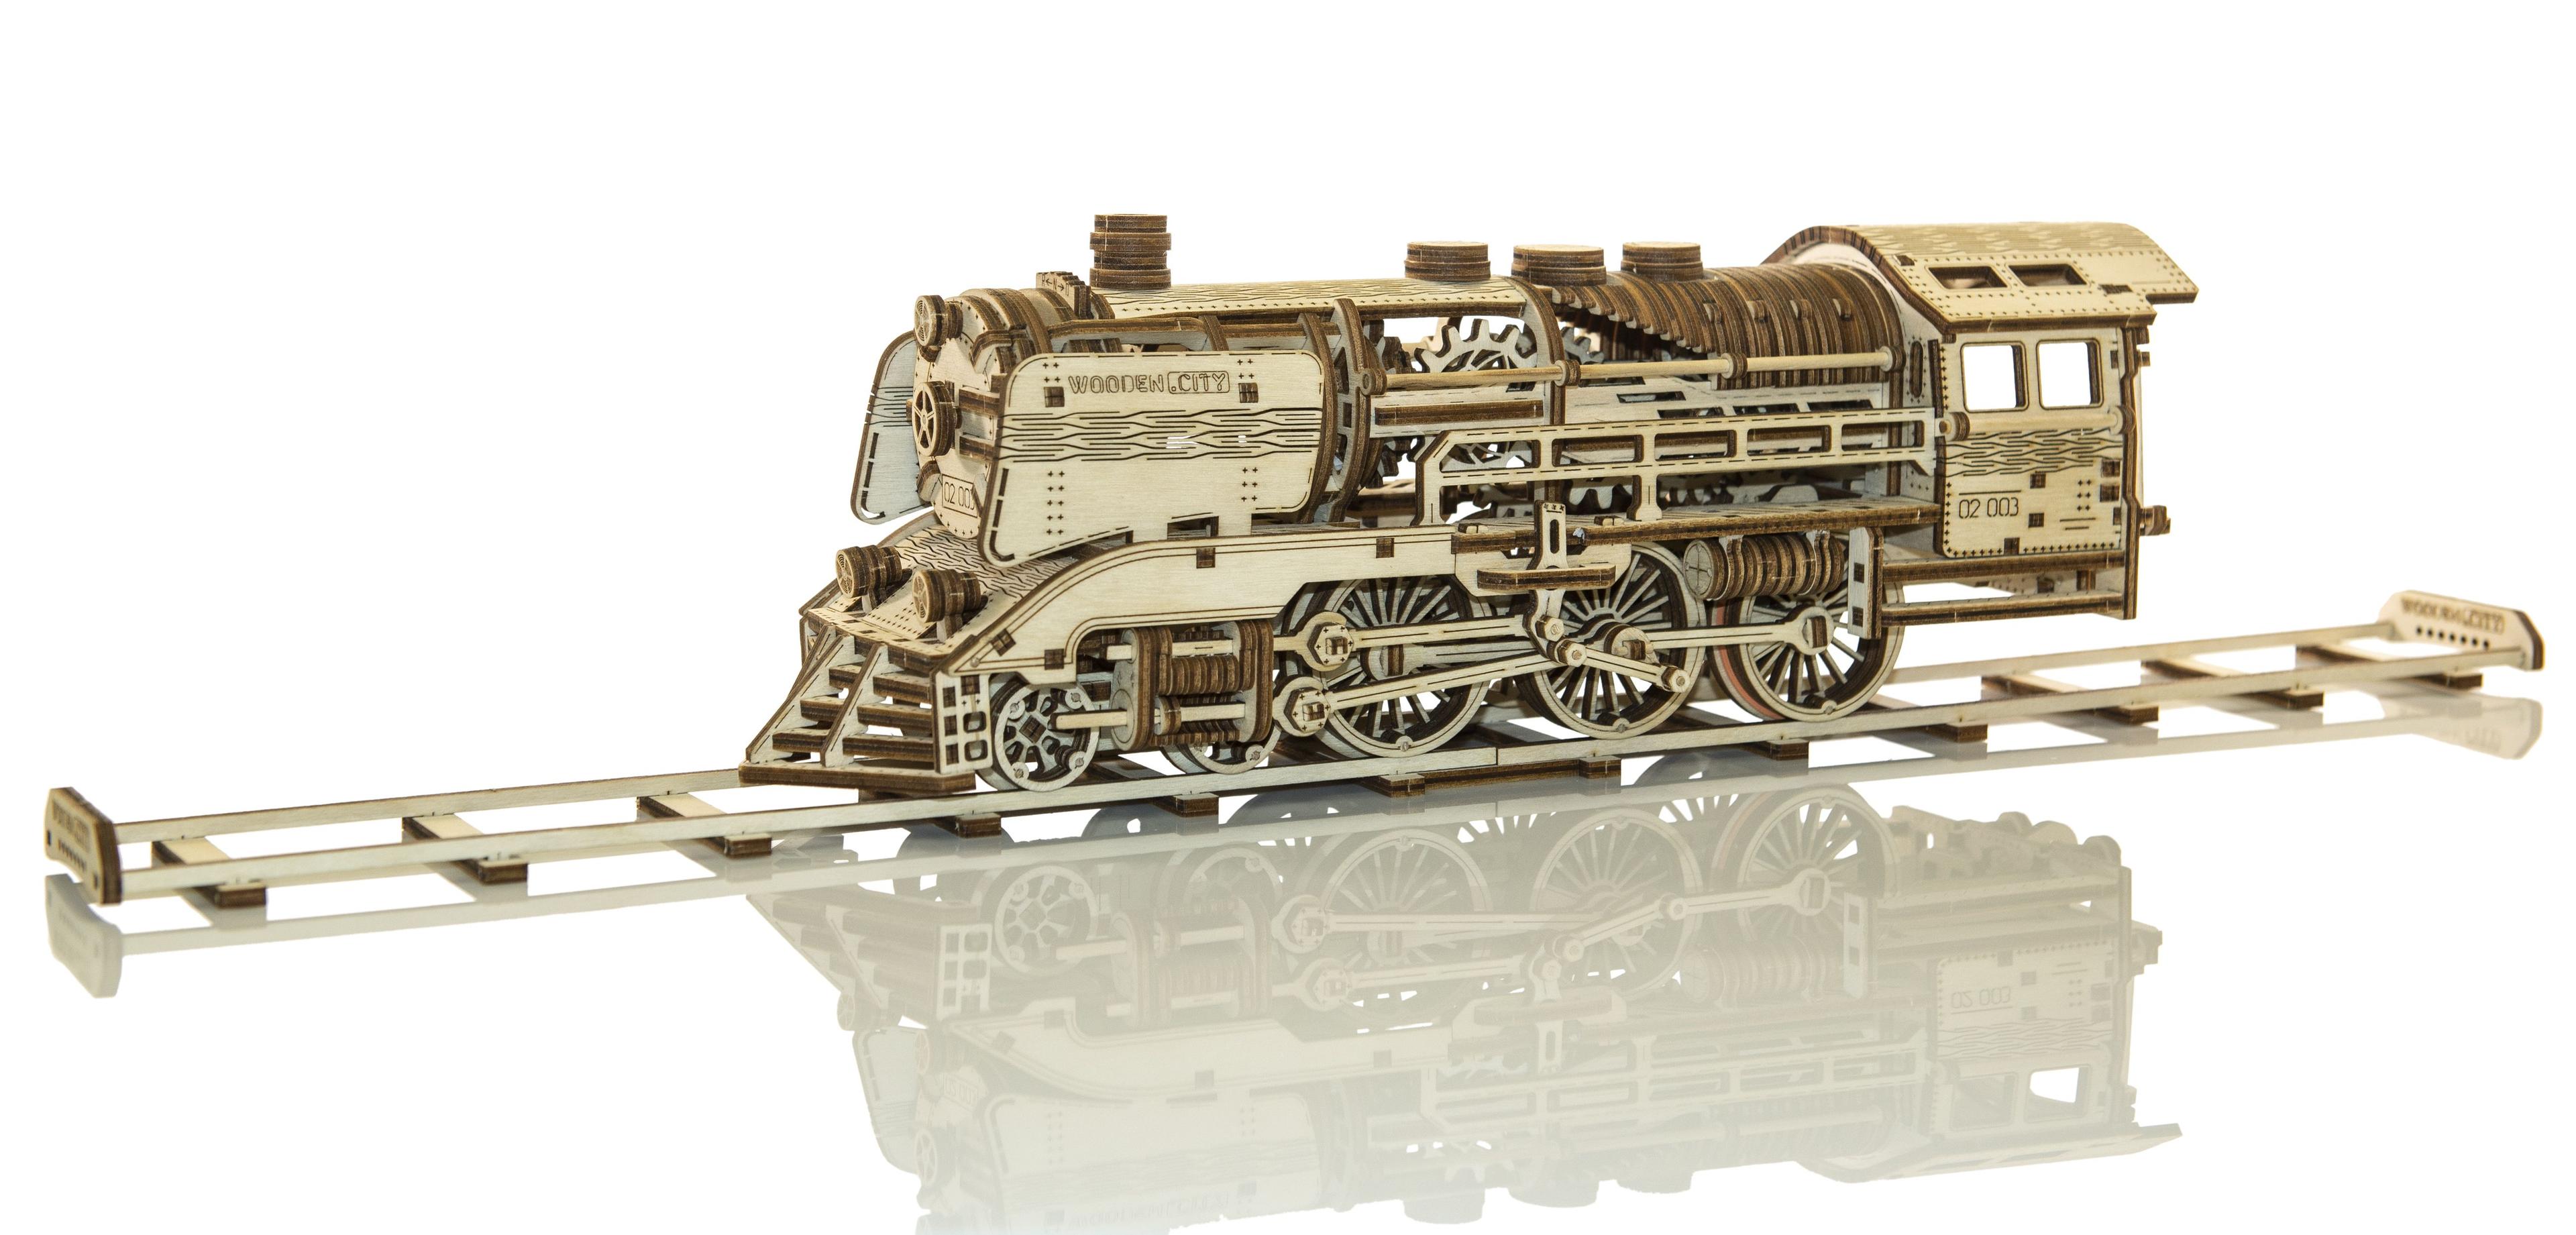 Wooden 3D Puzzle - Woden Express train with rails